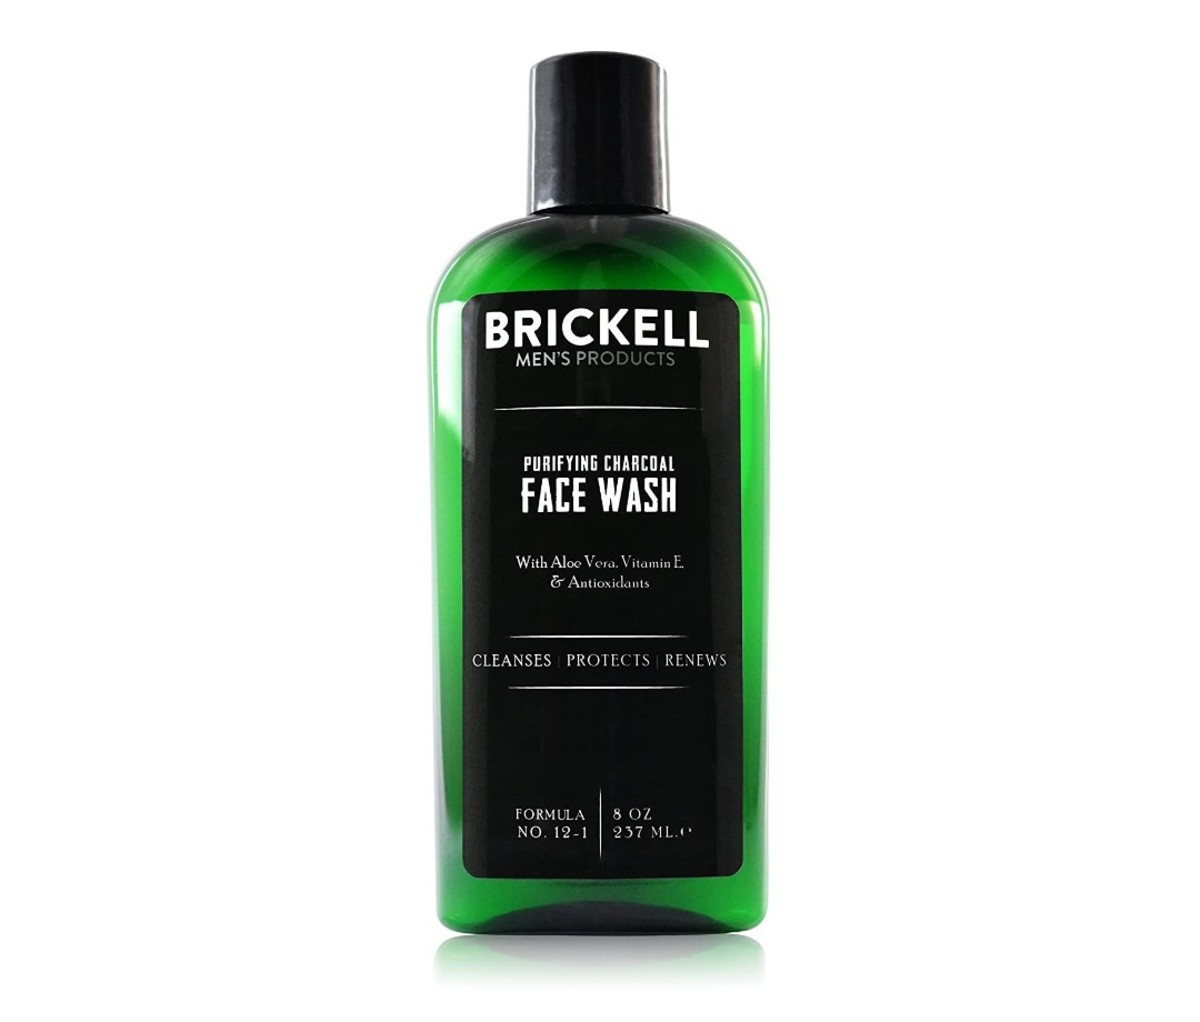 Purifying Charcoal Face Wash by Brickell Men’s Products